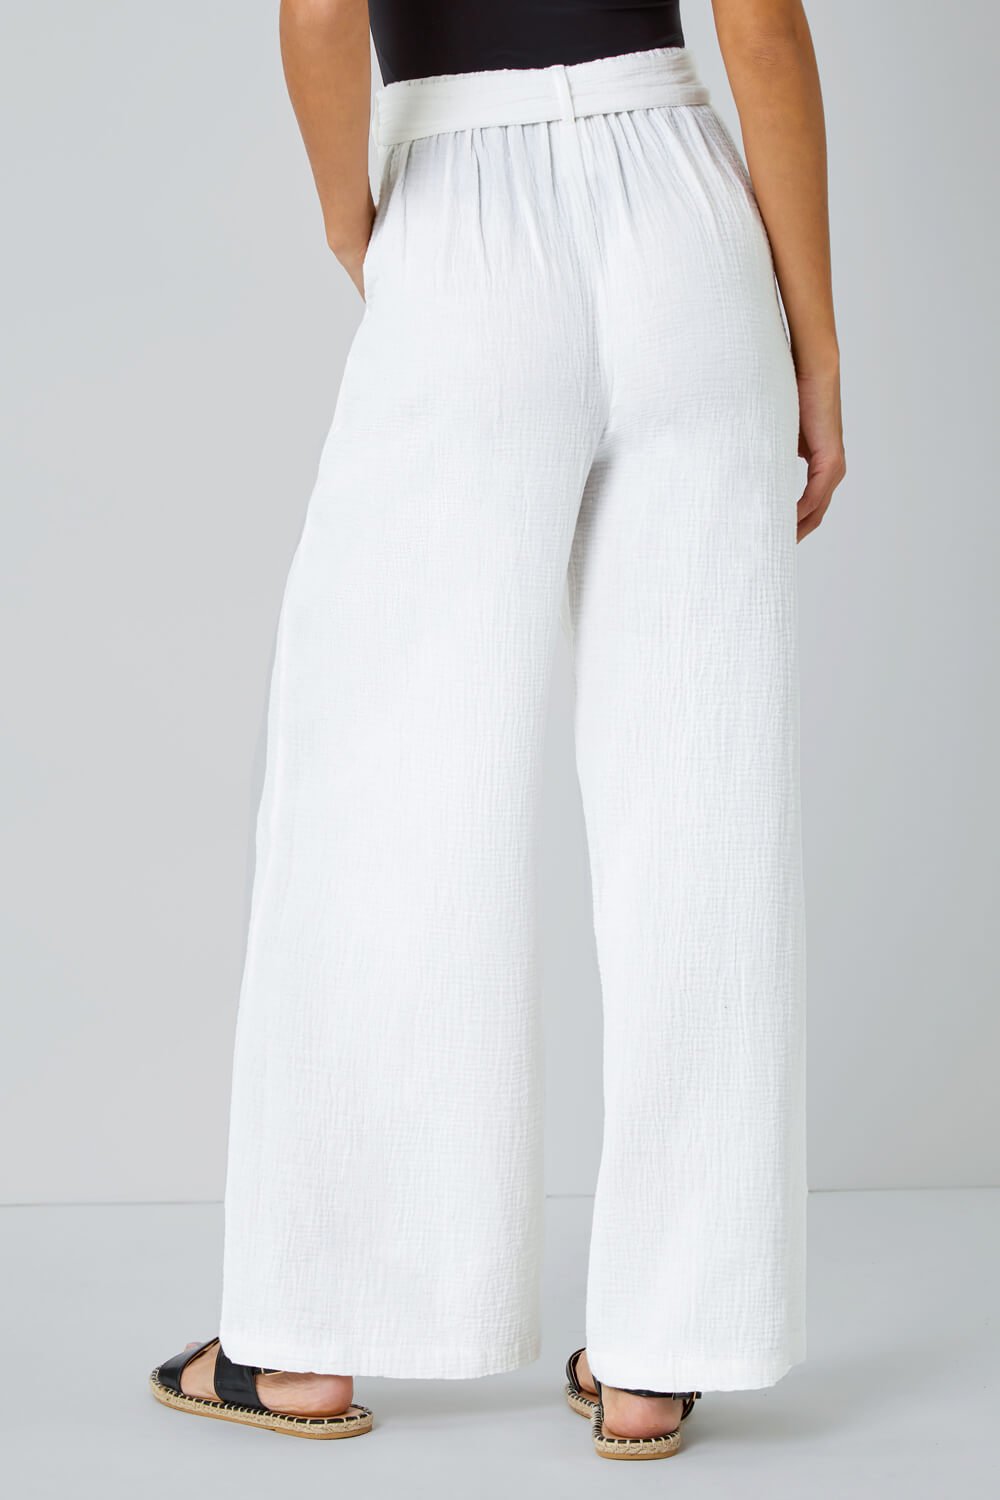 Ivory  Textured Cotton Wide Leg Trousers, Image 3 of 5